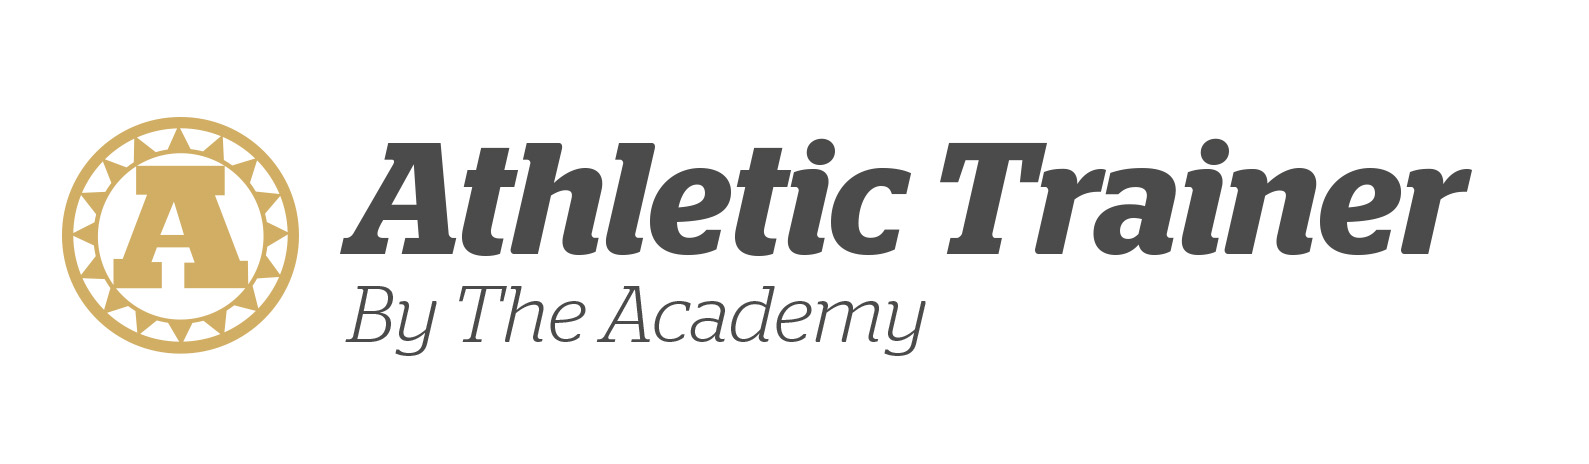 A Athletic Trainer by The Academy